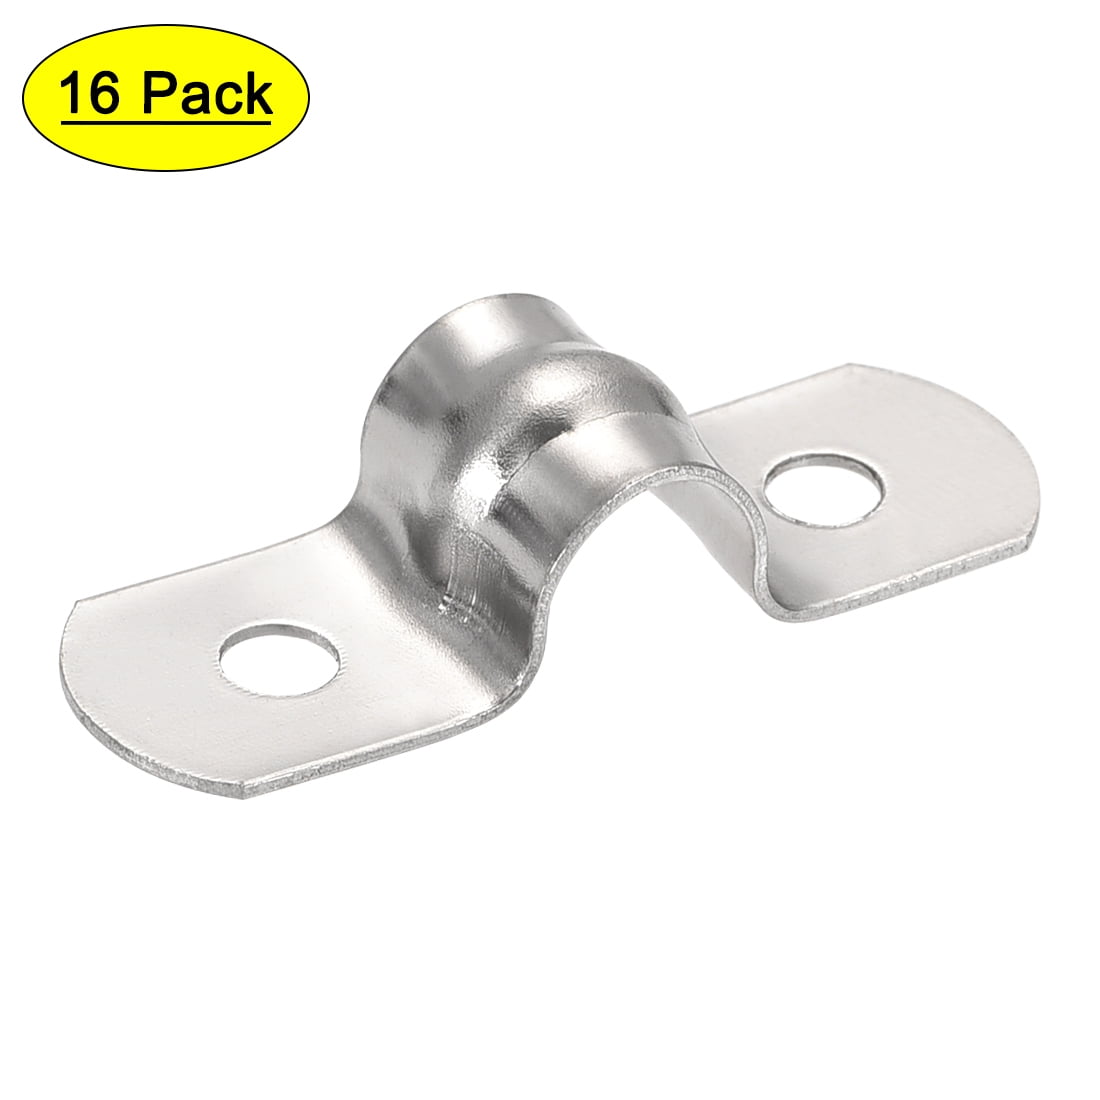 uxcell 18-32mm Clamping Range 304 Stainless Steel American Worm Gear Hose Clamps 20pcs 